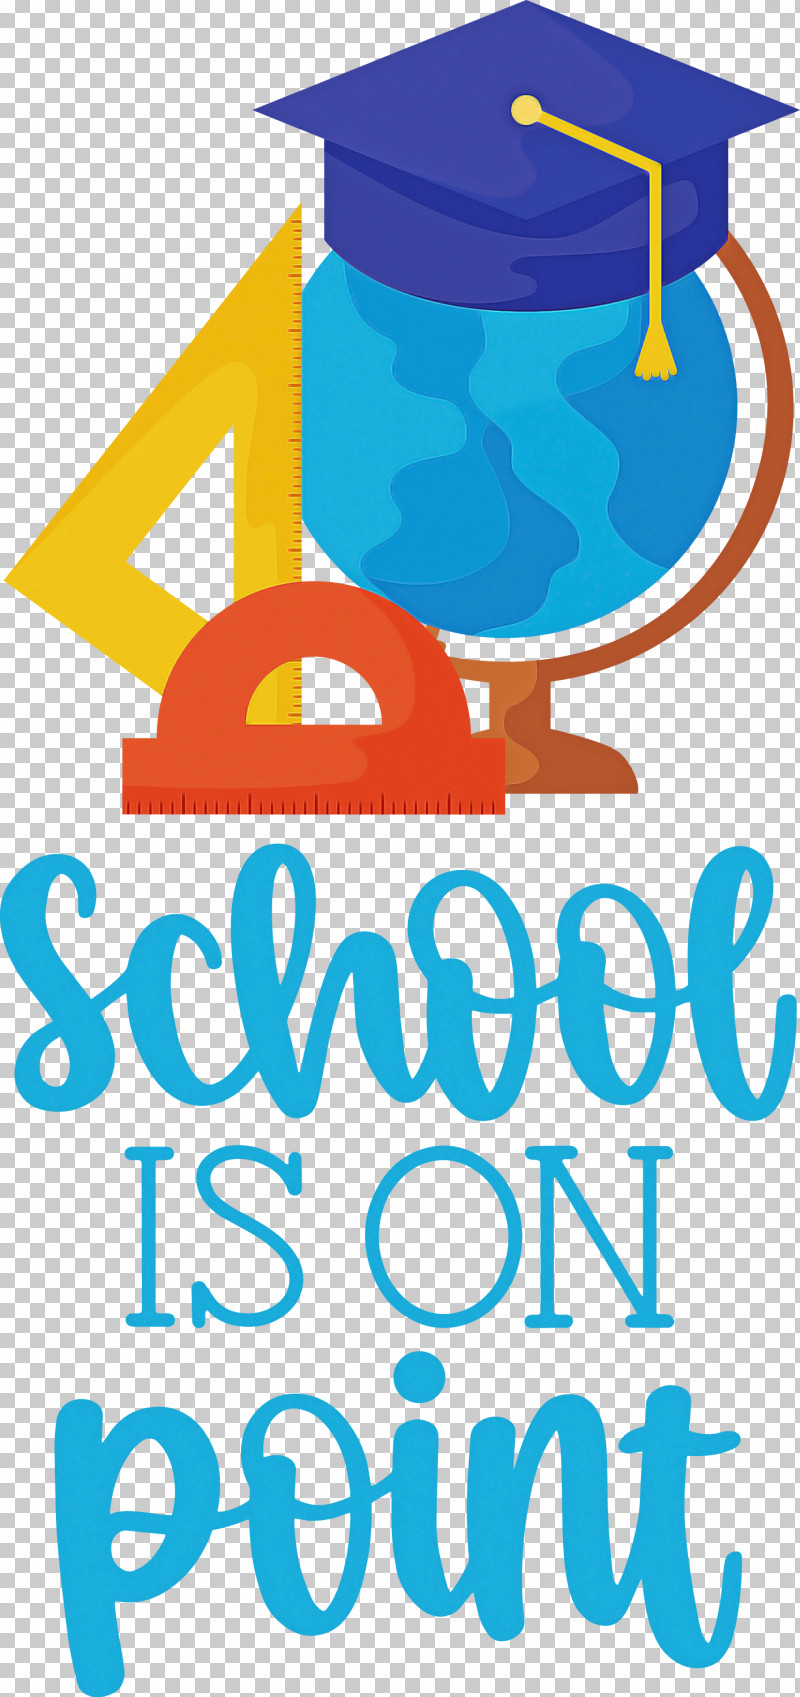 School Is On Point School Education PNG, Clipart, Drawing, Education, Globe, Line, Logo Free PNG Download